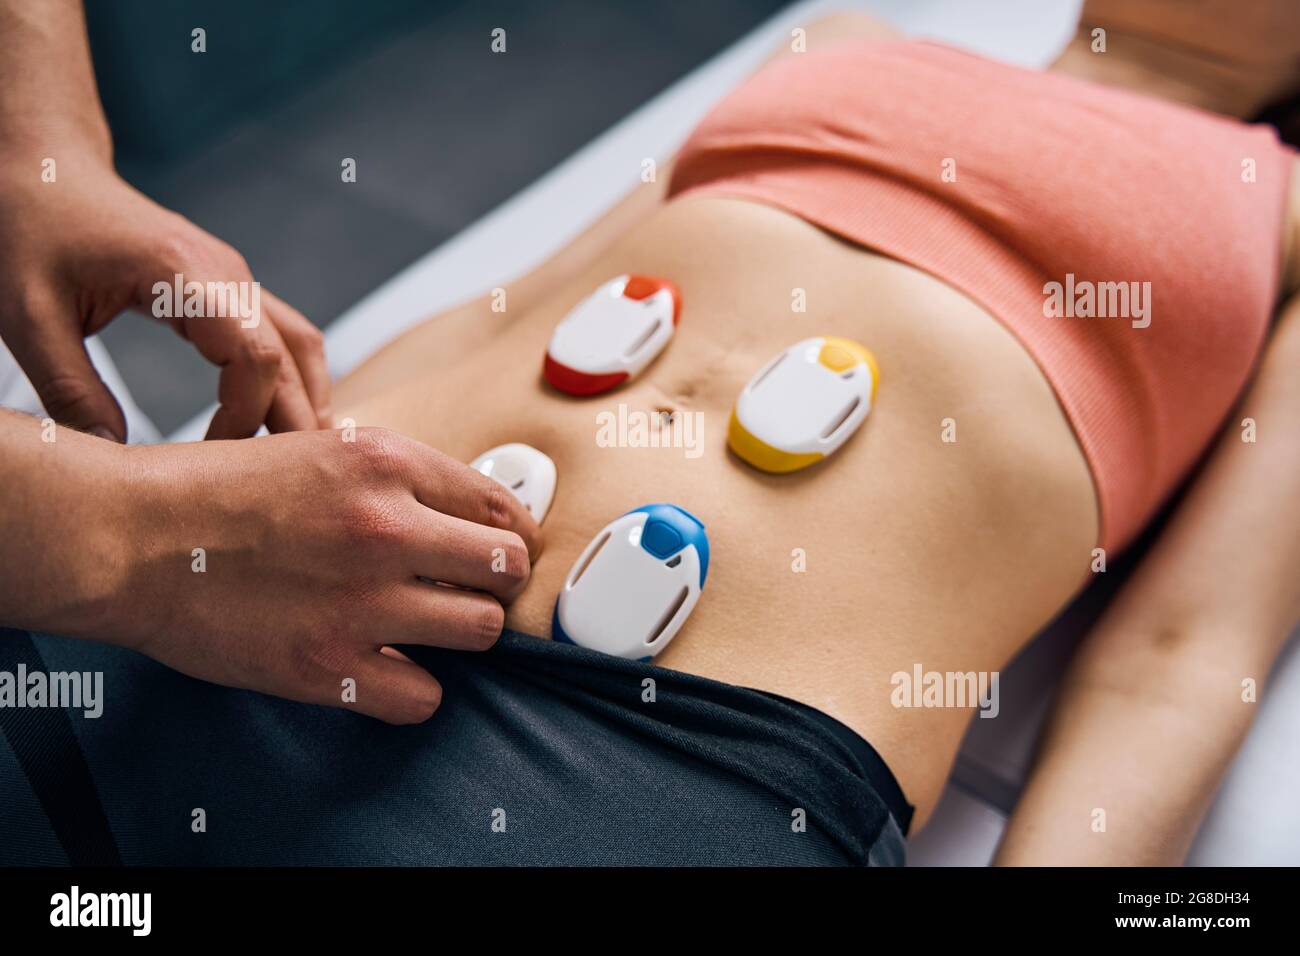 https://c8.alamy.com/comp/2G8DH34/close-up-of-electric-stimulator-on-woman-stomach-physiotherapy-electrodes-for-myostimulation-2G8DH34.jpg